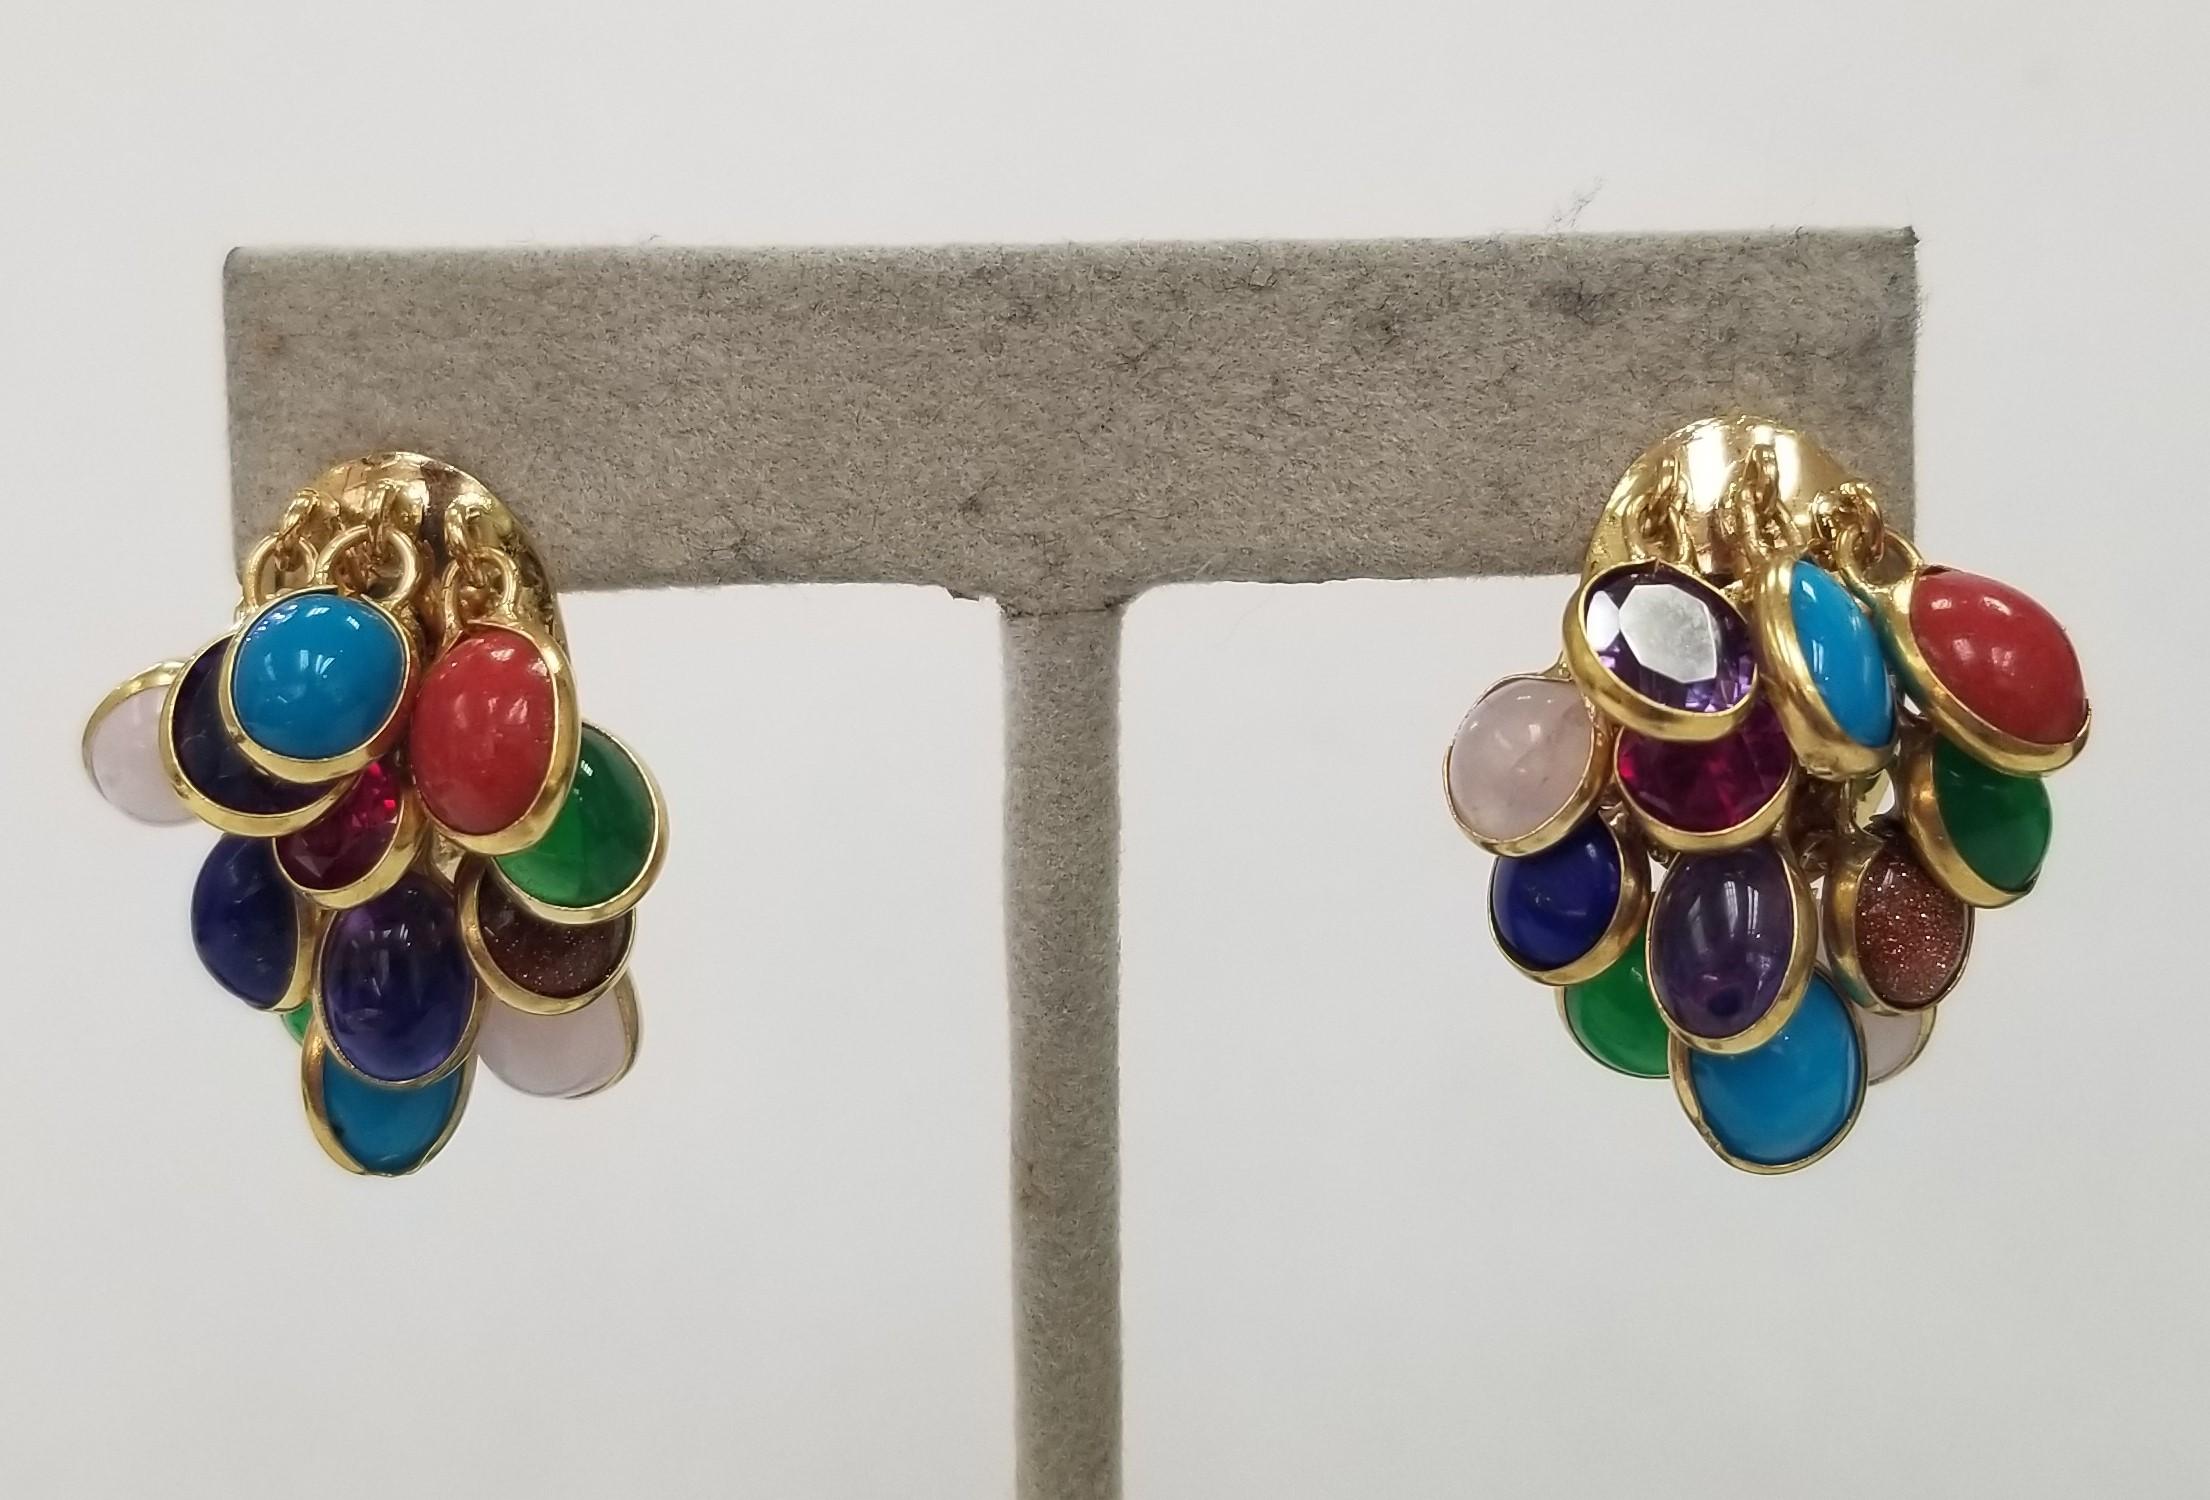 14k Yellow Gold Multi-Colored Gemstone Ring and Matching Earrings 
Specifications:    
    GEMSTONE: Multi-Colored Gemstone        
    metal: 14K YELLOW GOLD
    type: BAND ring
    weight:  27.10 Grams
    size: 6.5 US
